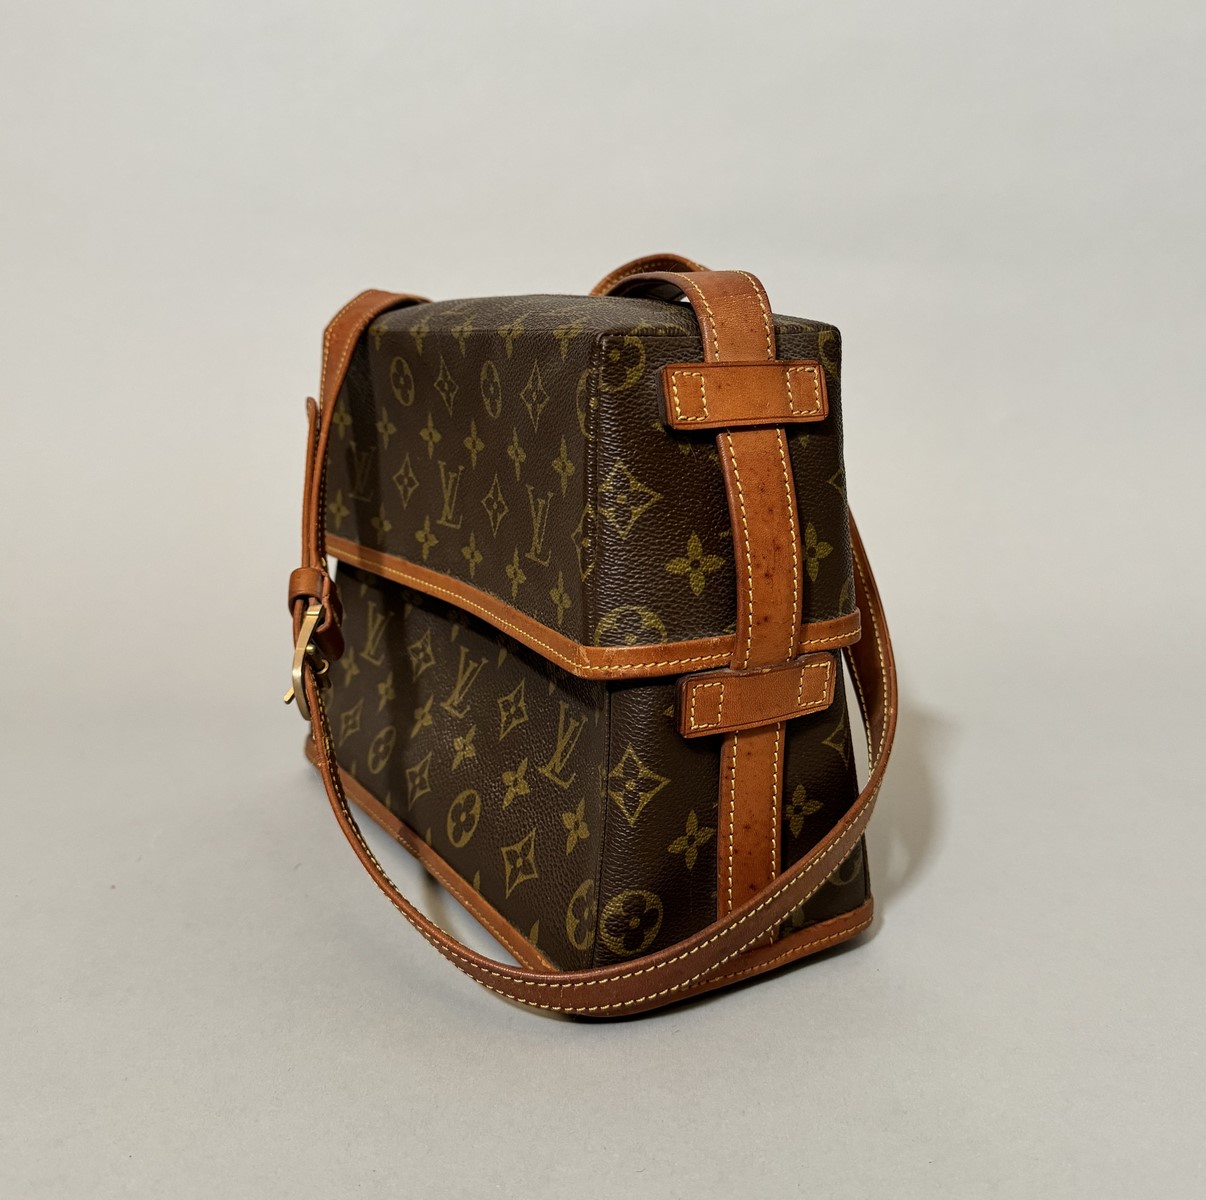 Henry-Louis VUITTON (1911-2002). - Image 3 of 5